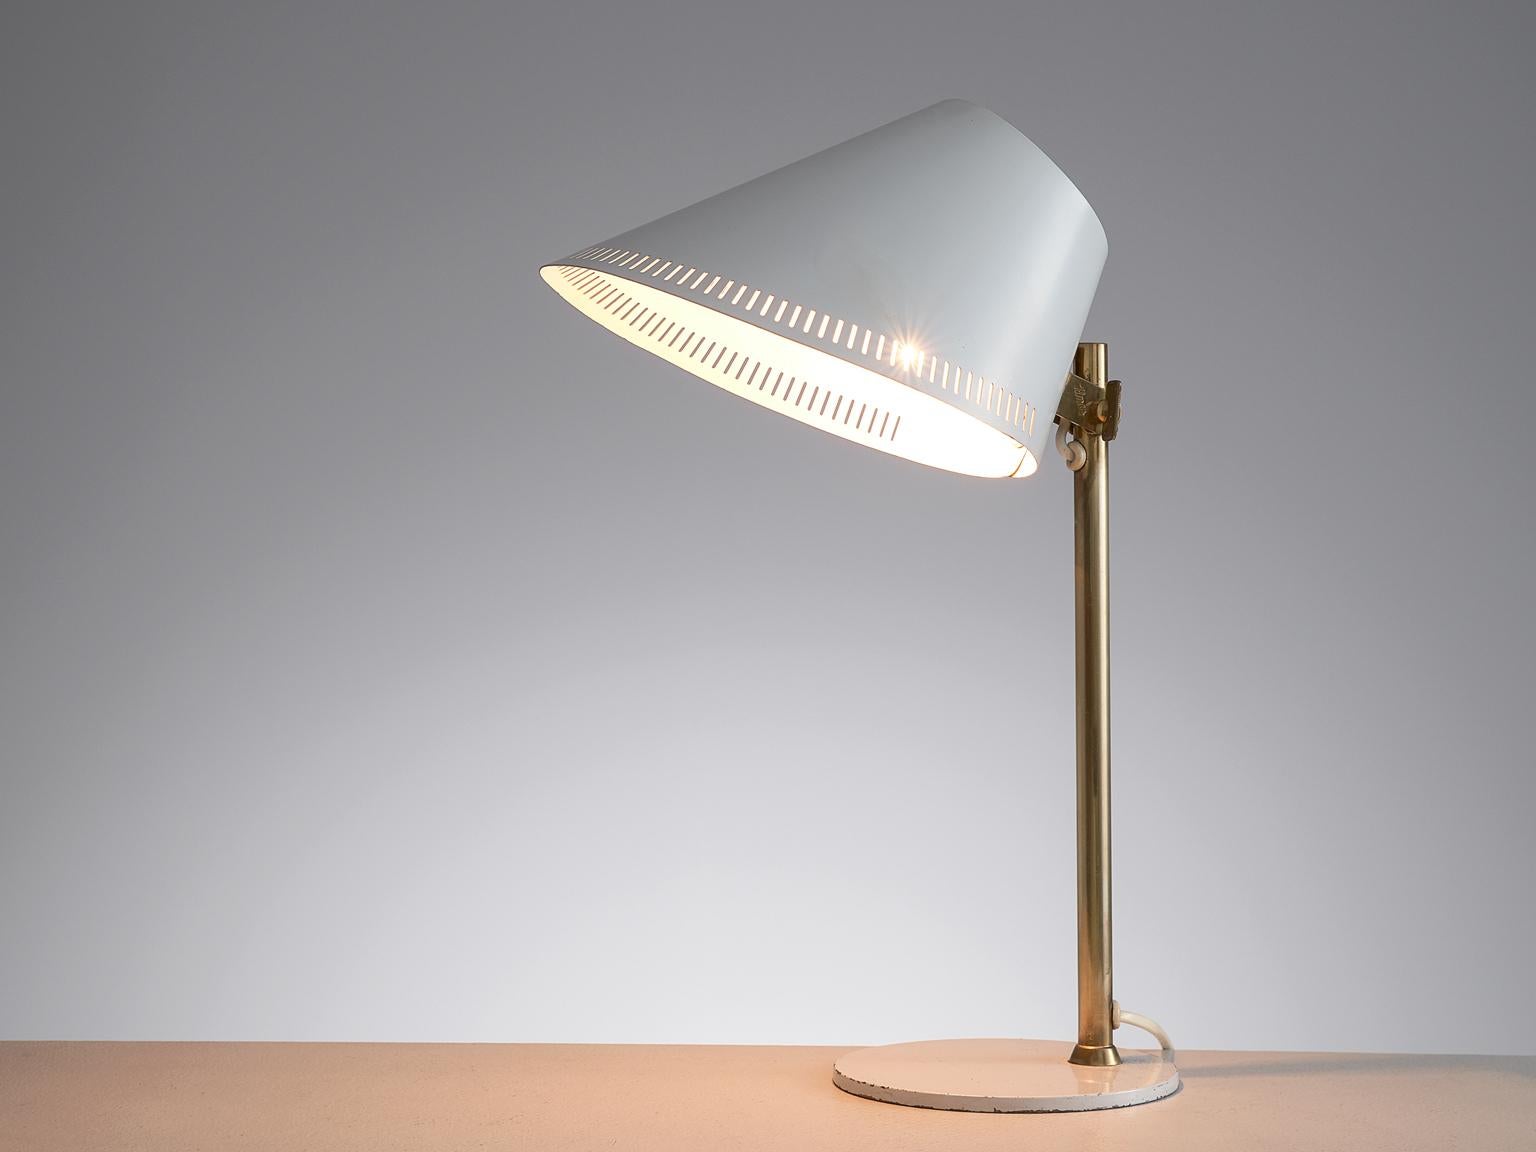 Paavo Tynell for Idman, desk light, white enameled metal and brass, Finland, 1950s.

Beautiful designed '9227' table lamp by Finnish designer Paavo Tynell for Idman. This model features a very refined design that shows Tynell's style perfectly. Use